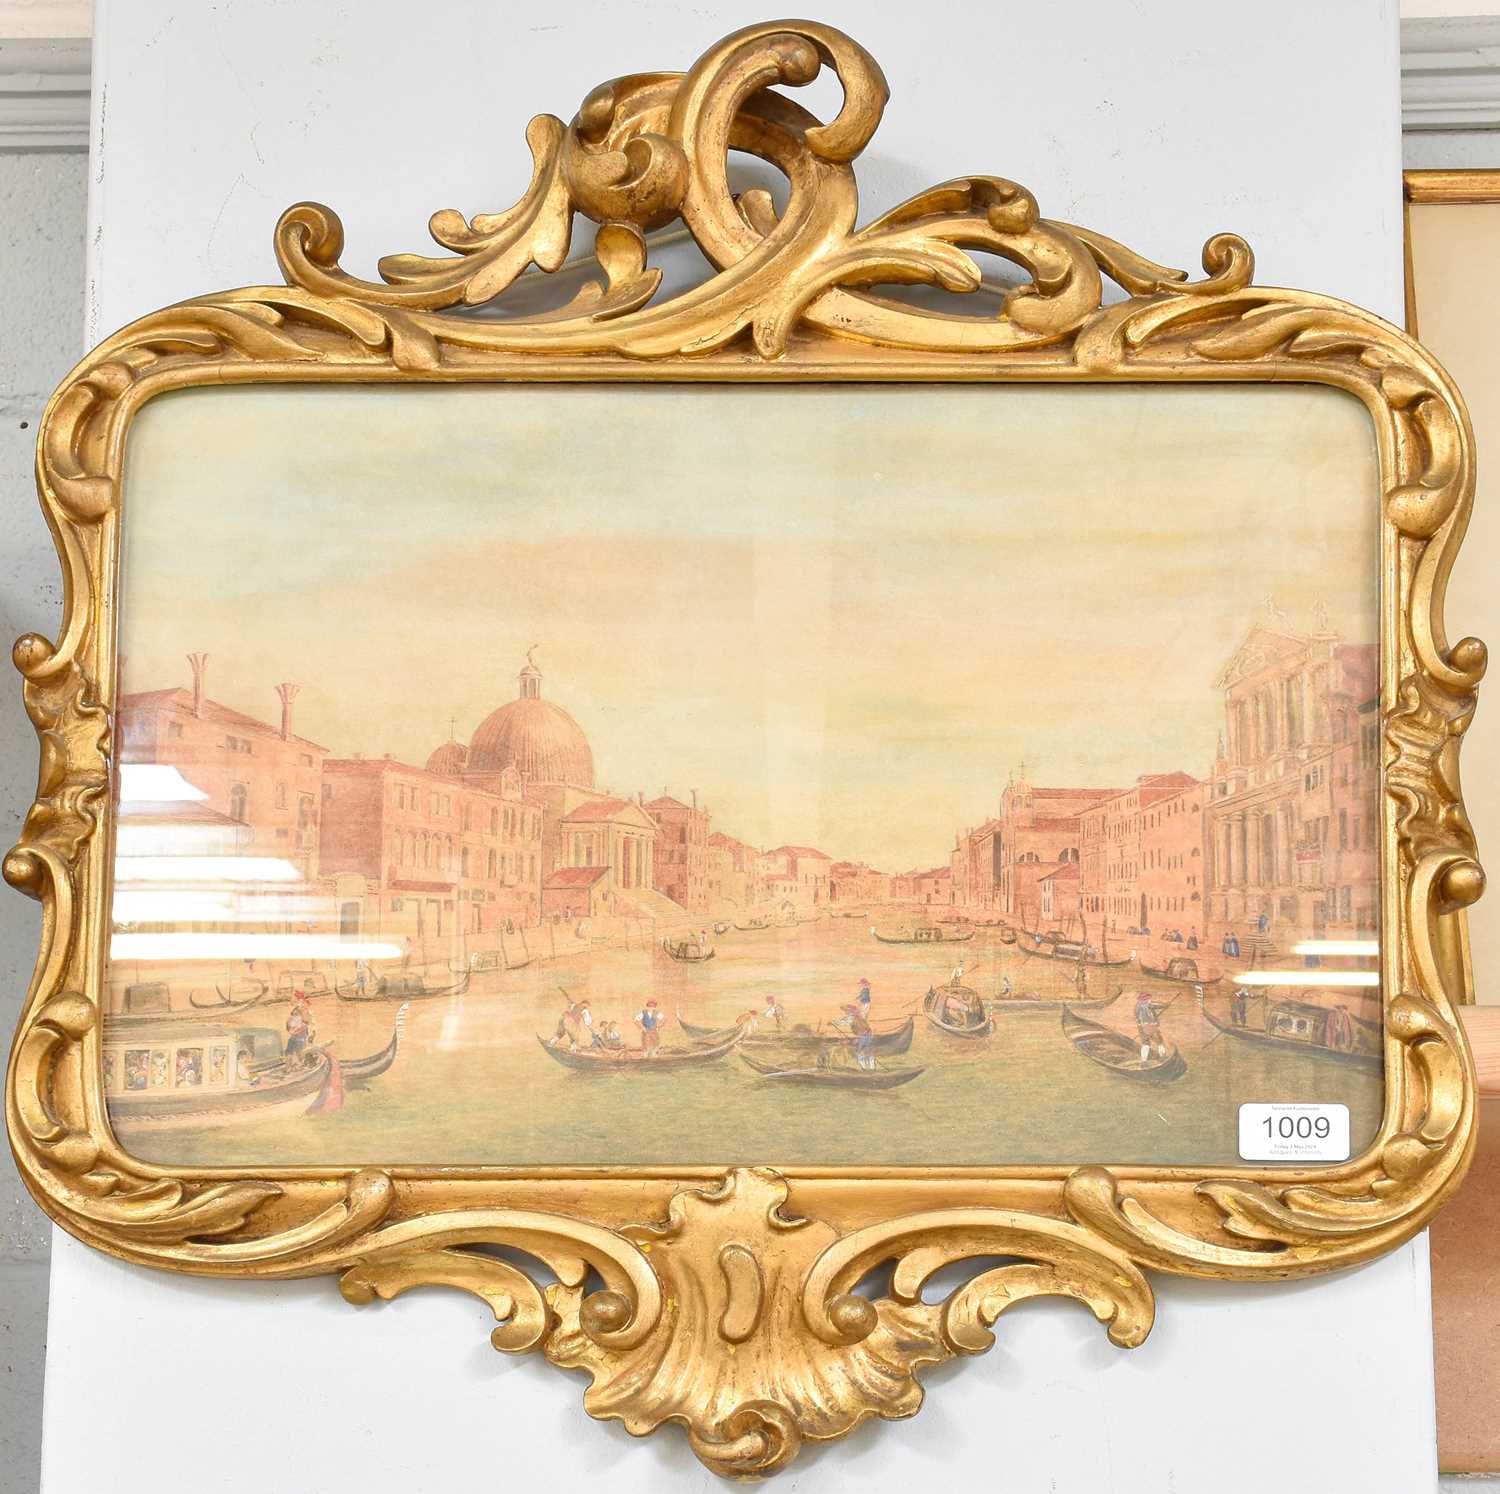 Italian School (19th Century) Veiw of the Grand Canal in Venice Watercolour heightened, 35cm by 44.